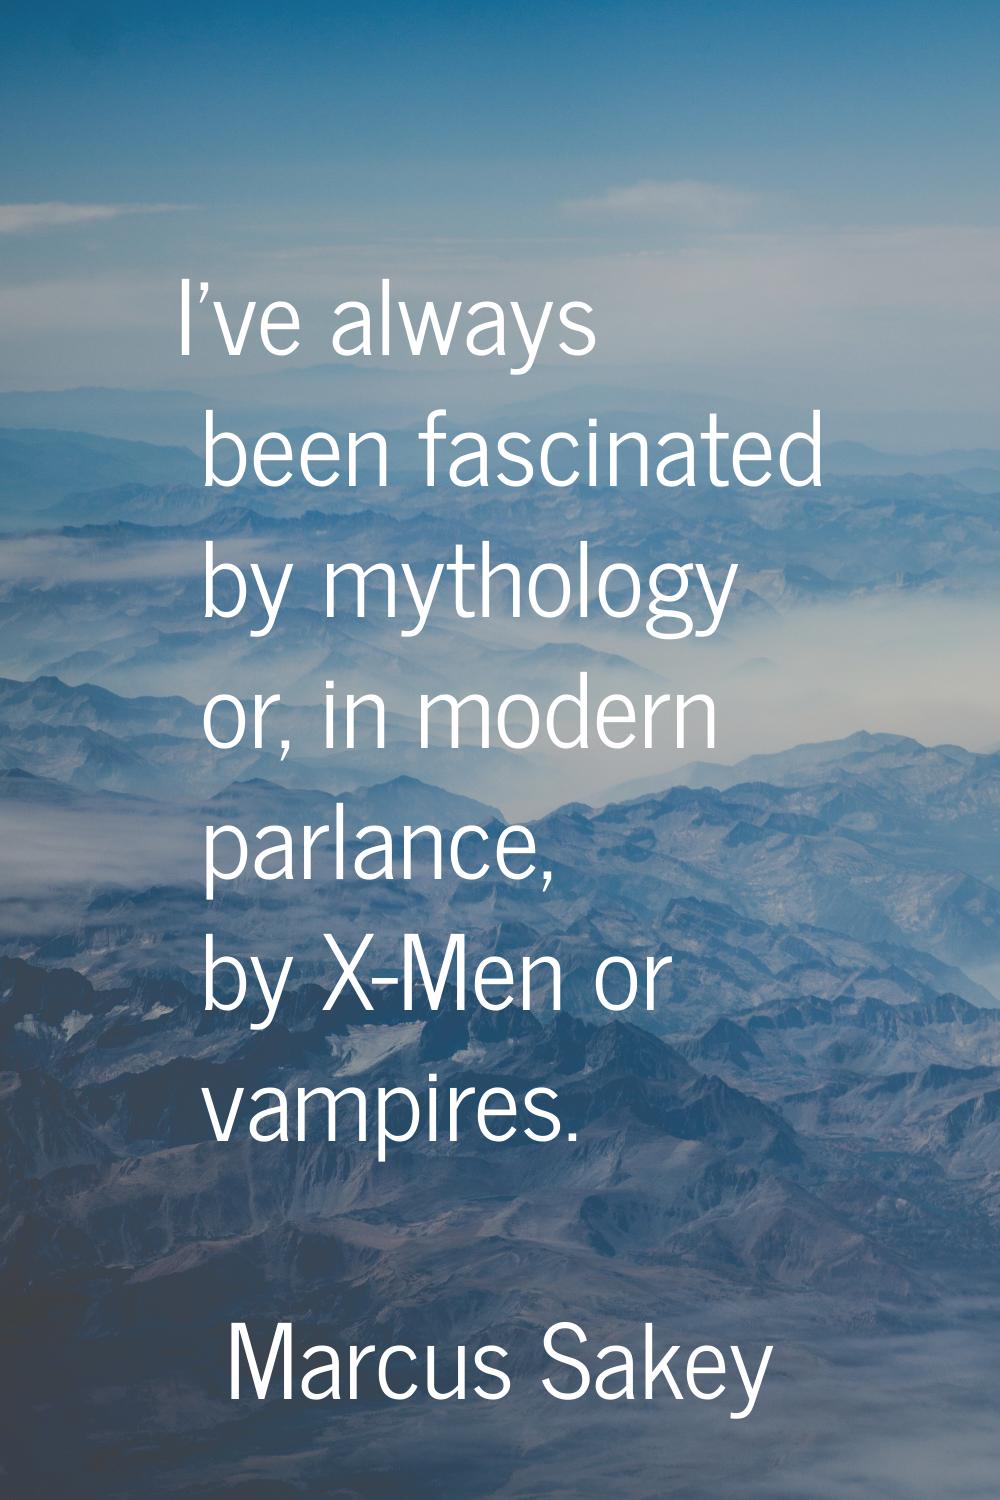 I've always been fascinated by mythology or, in modern parlance, by X-Men or vampires.